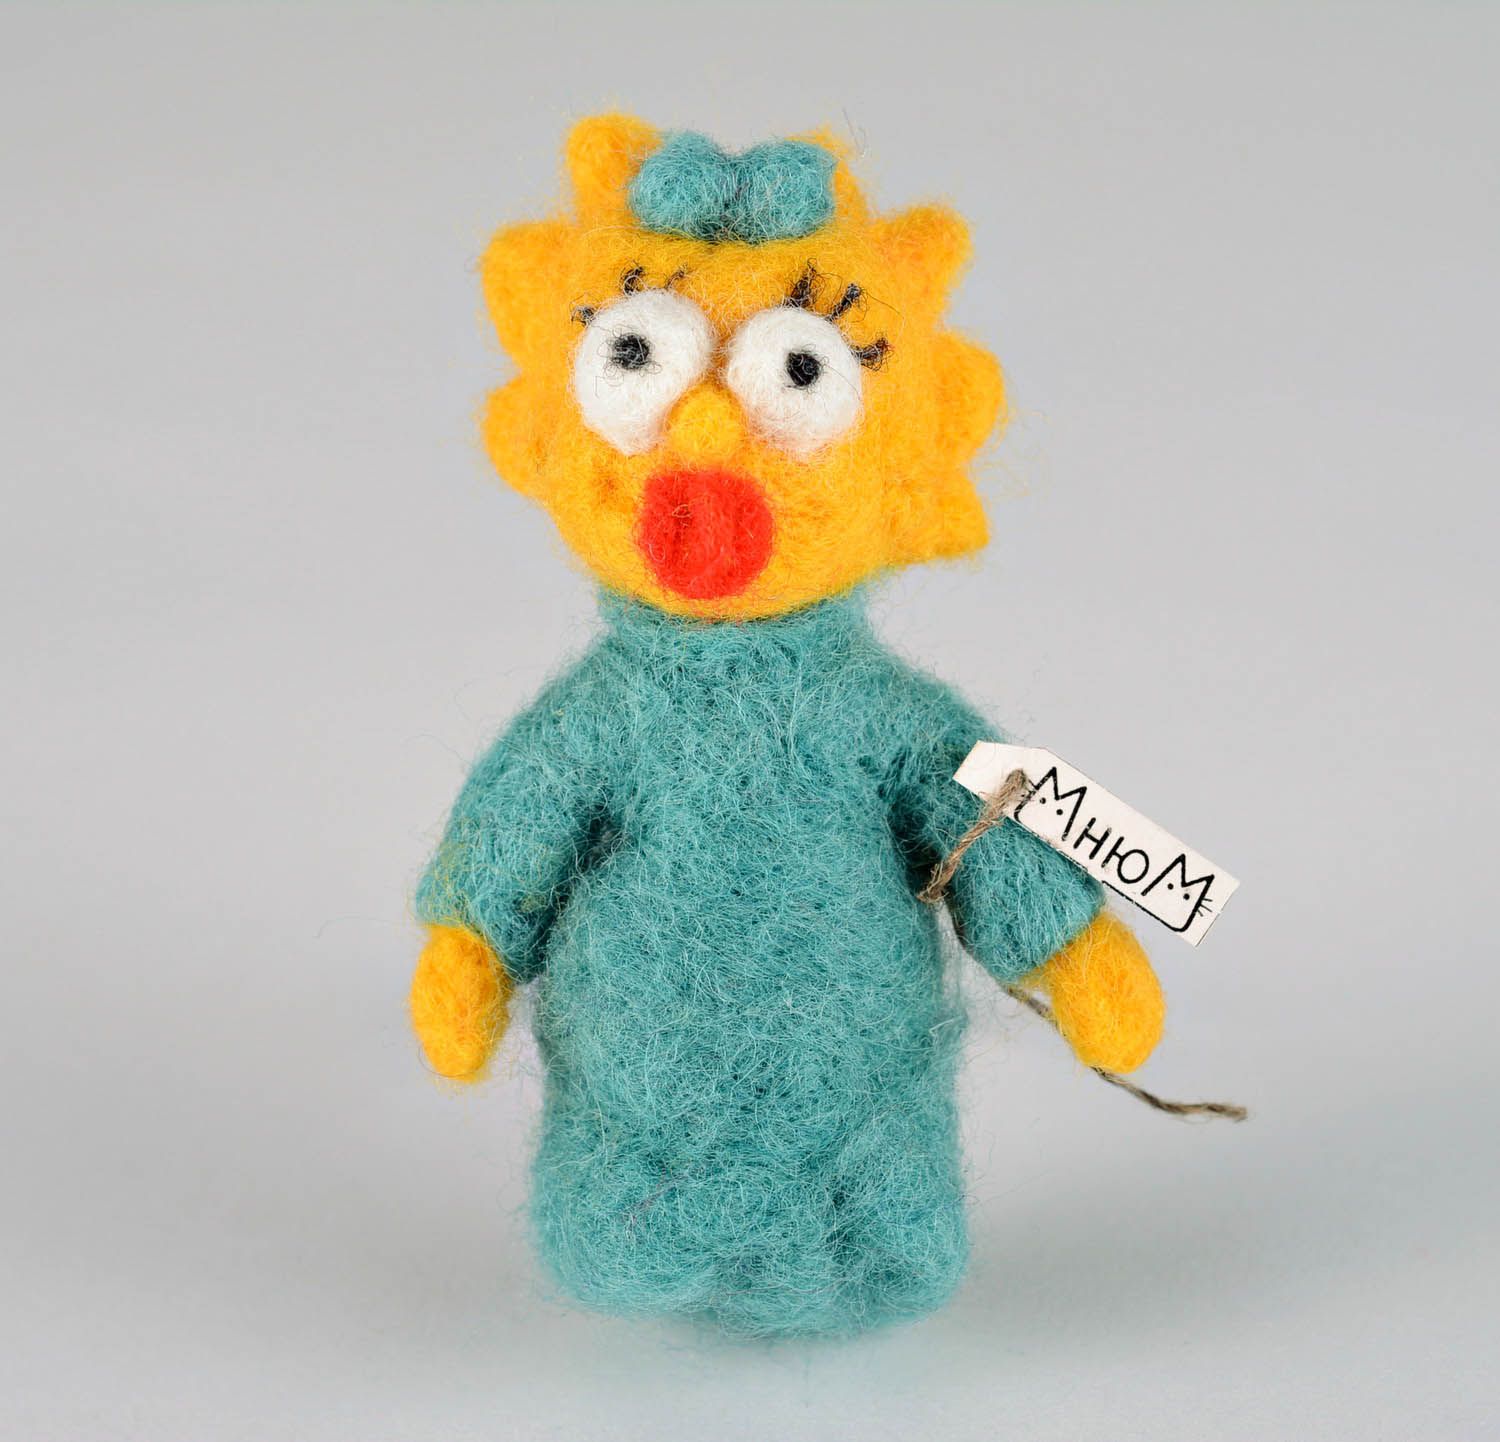 Toy made of wool using felting technique photo 1